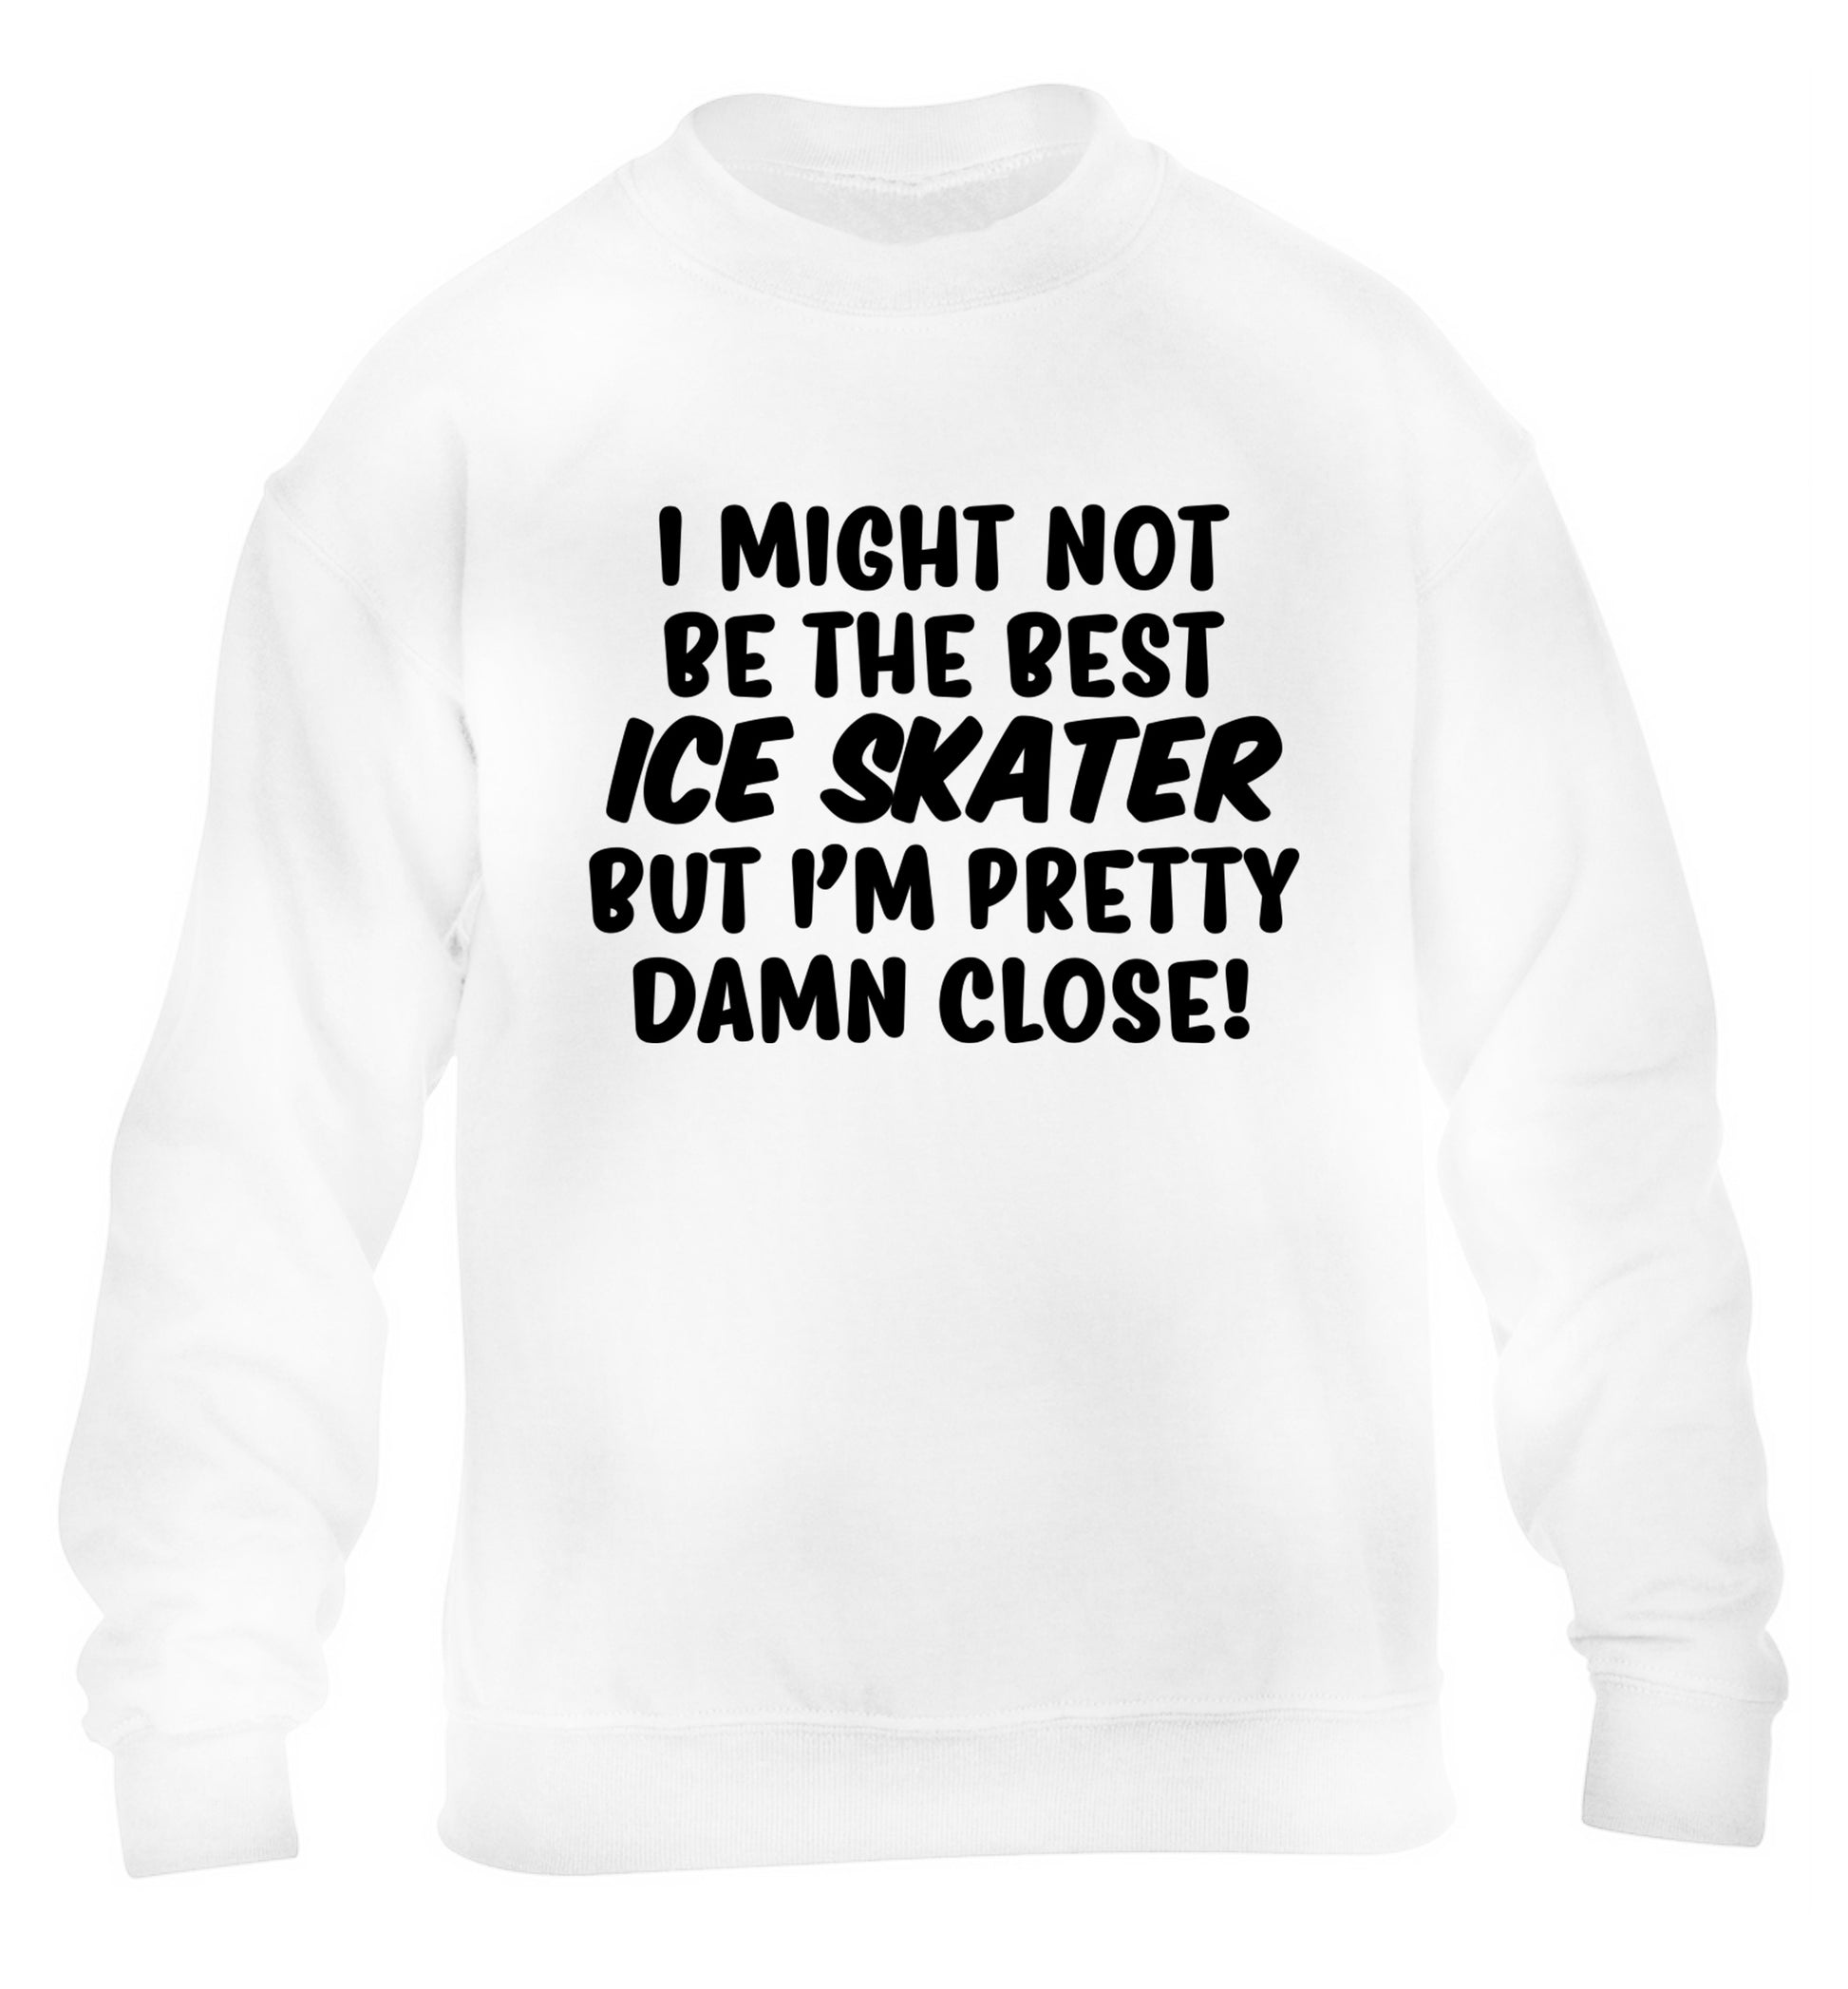 I might not be the best ice skater but I'm pretty damn close! children's white sweater 12-14 Years